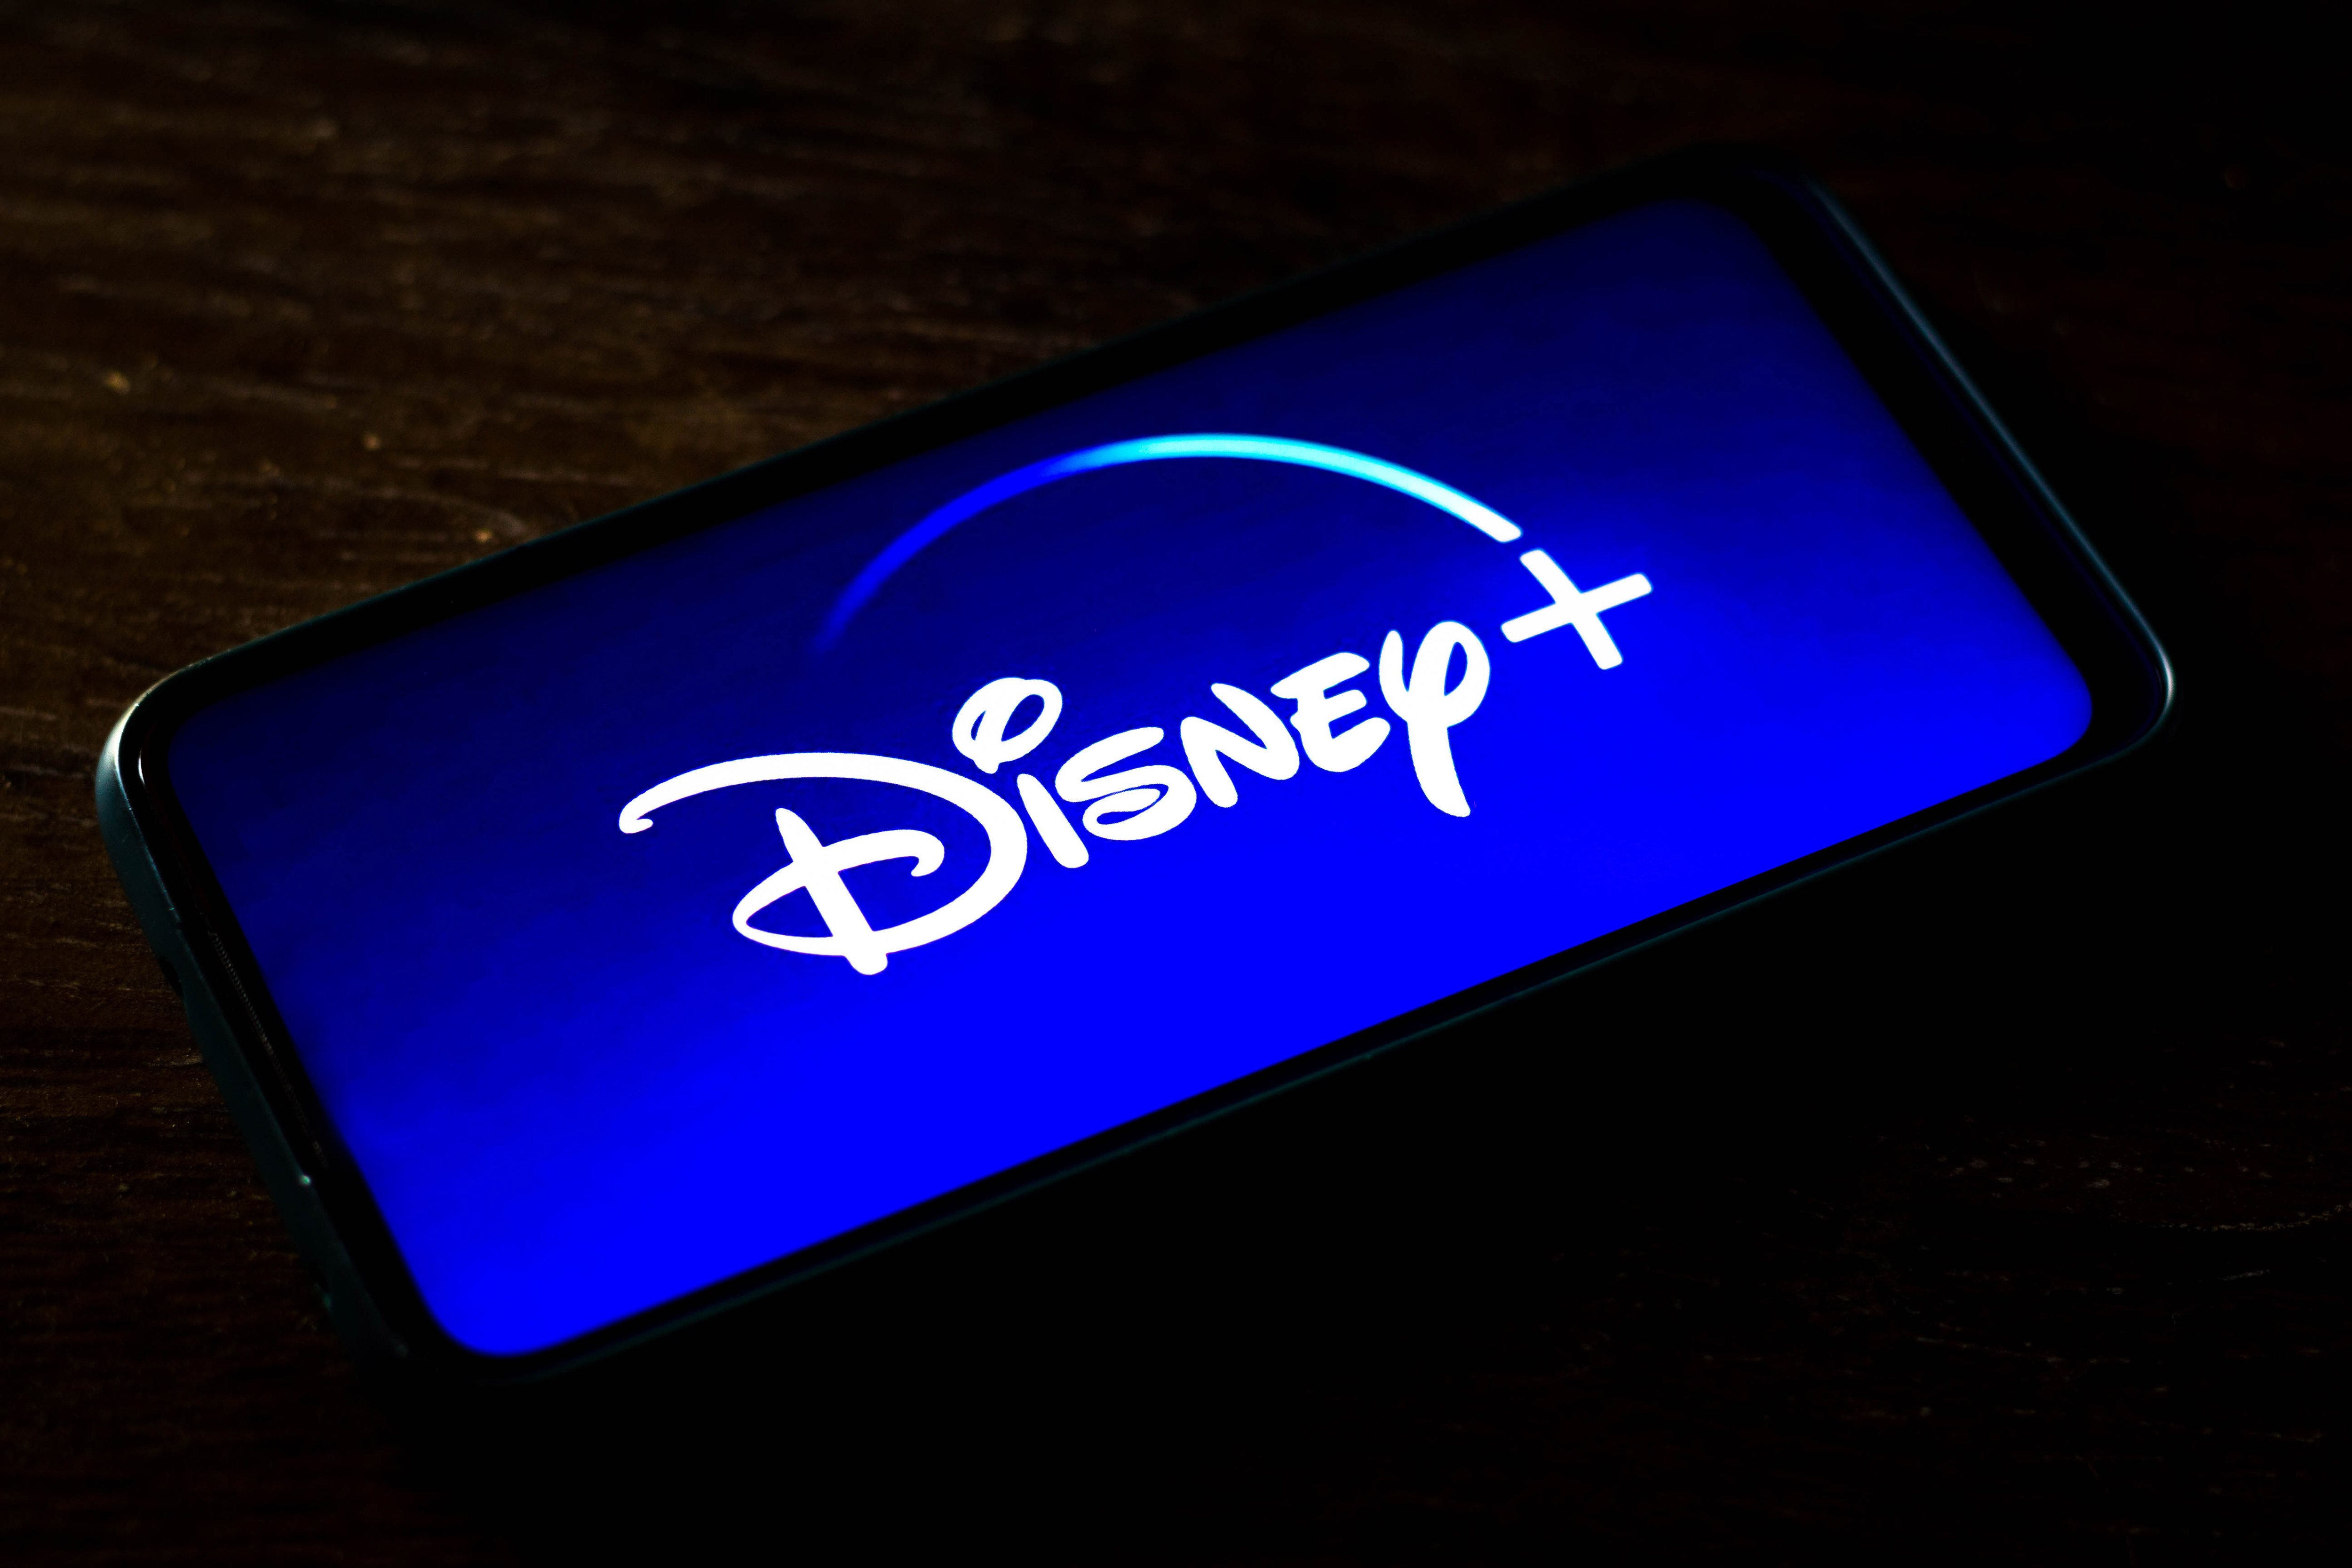 What’s New on Disney+ January 2022